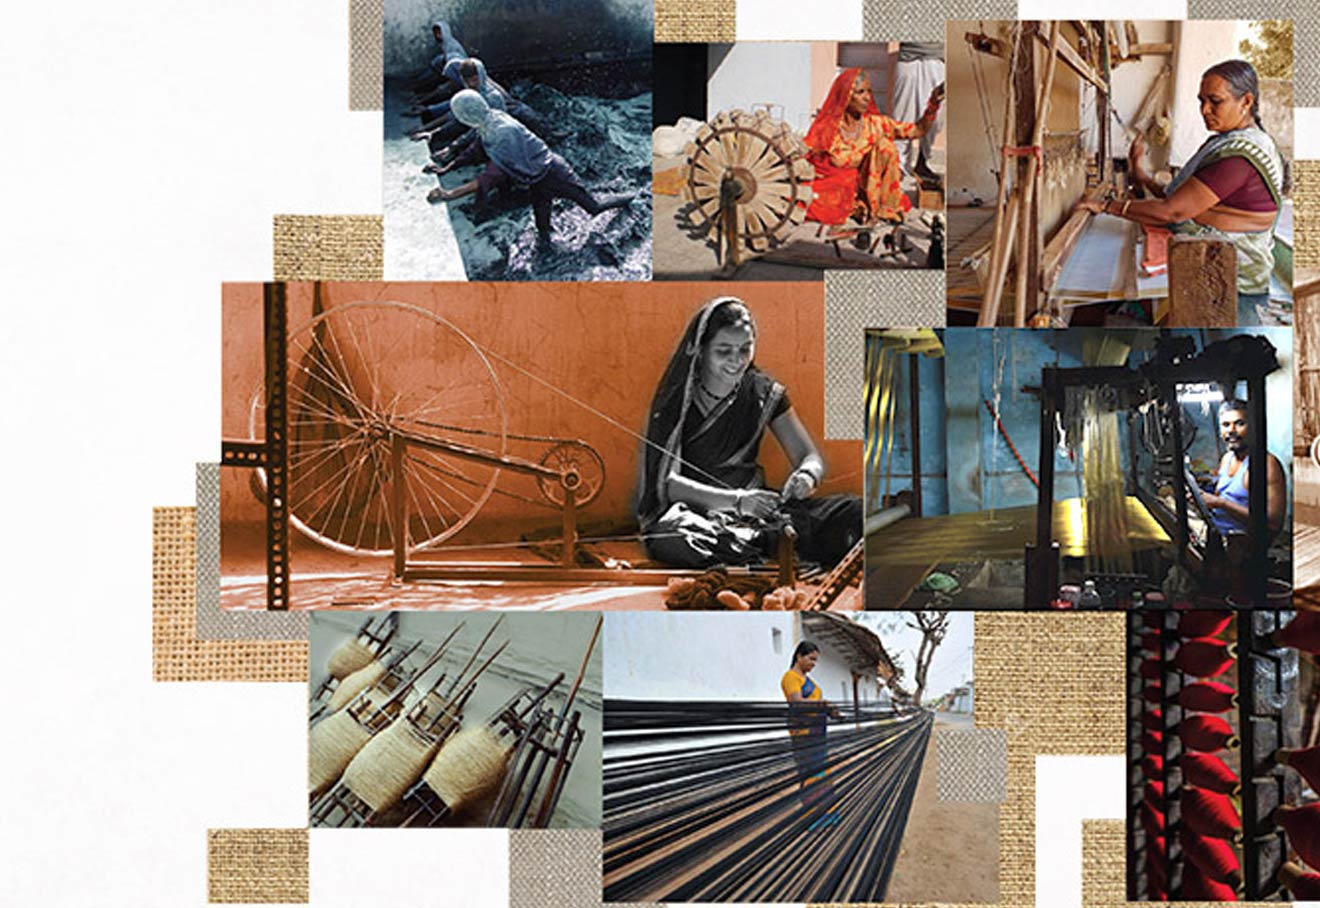 TN Govt Plans Initiatives To Encourage Youth Participate In Handloom Sector